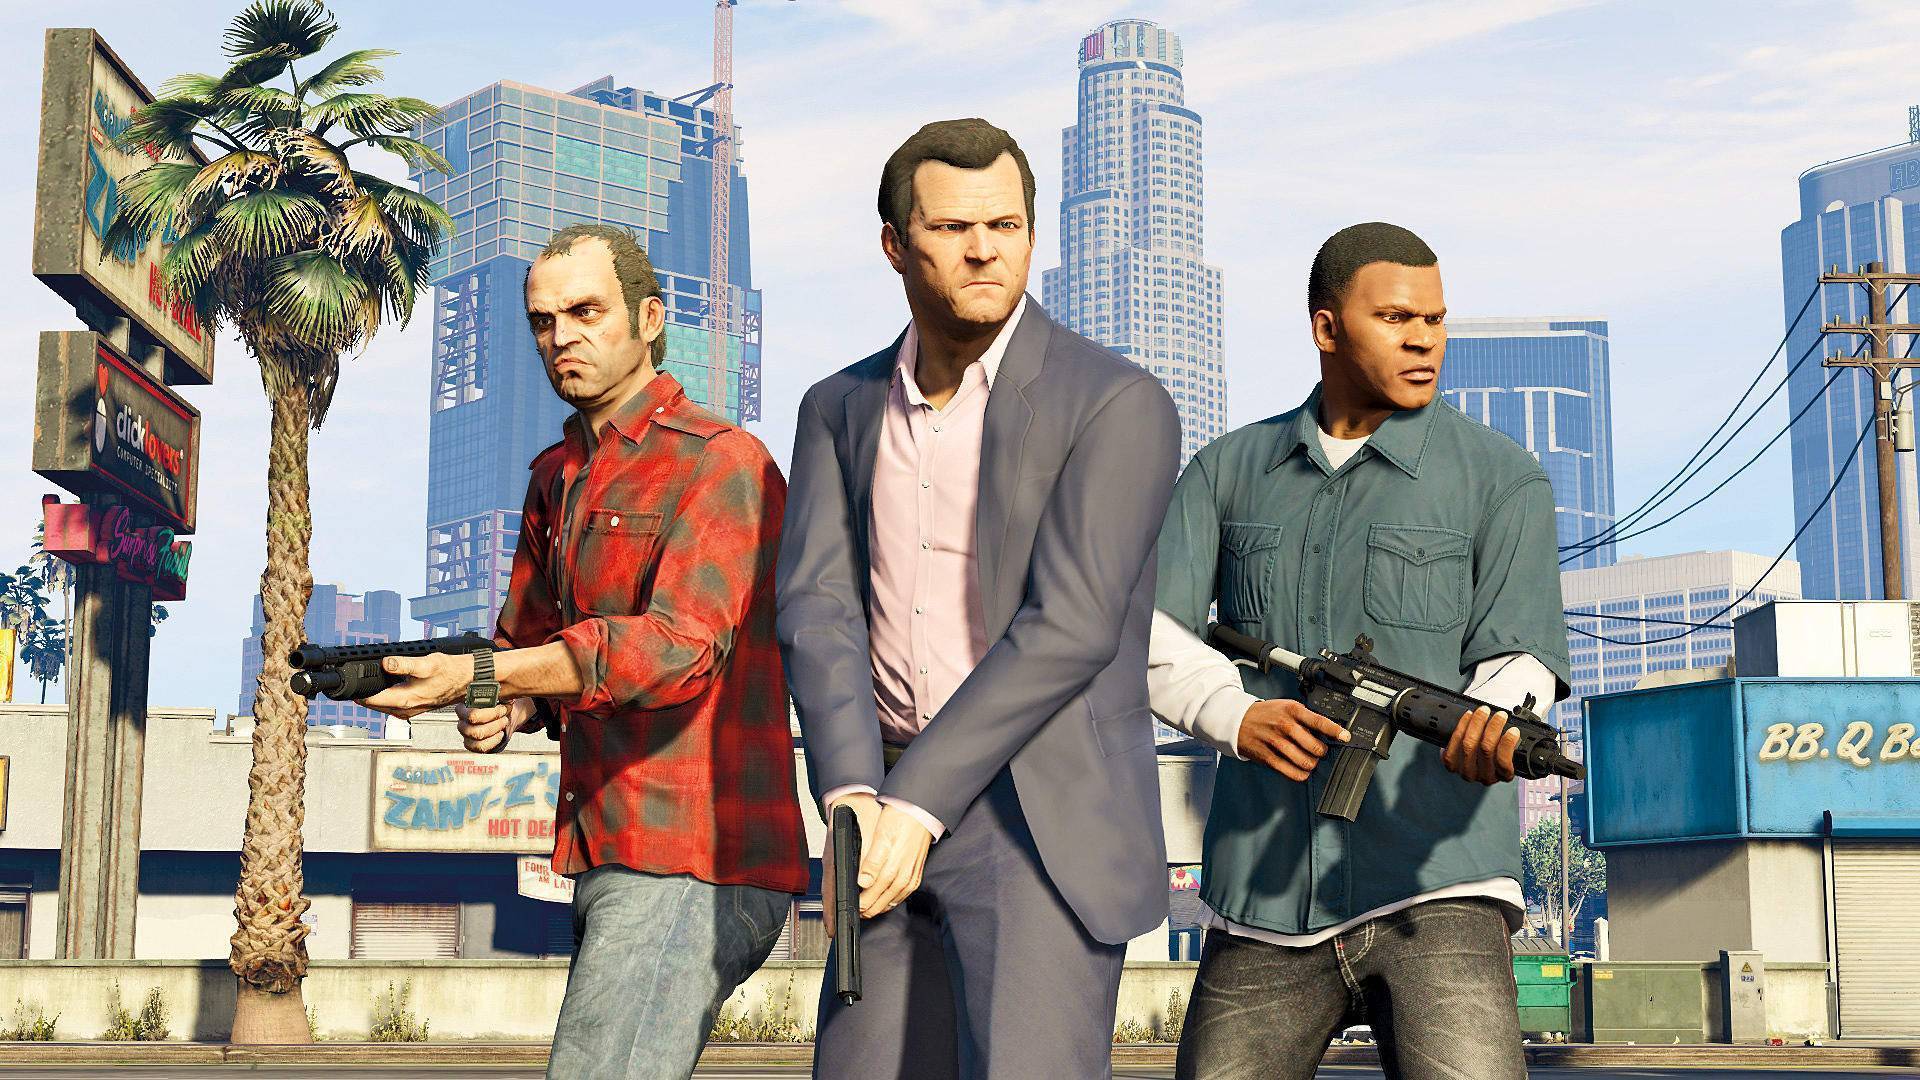 Cook Facet banana GRAND THEFT AUTO V: PREMIUM ONLINE EDITION (PC) Key cheap - Price of $8.34